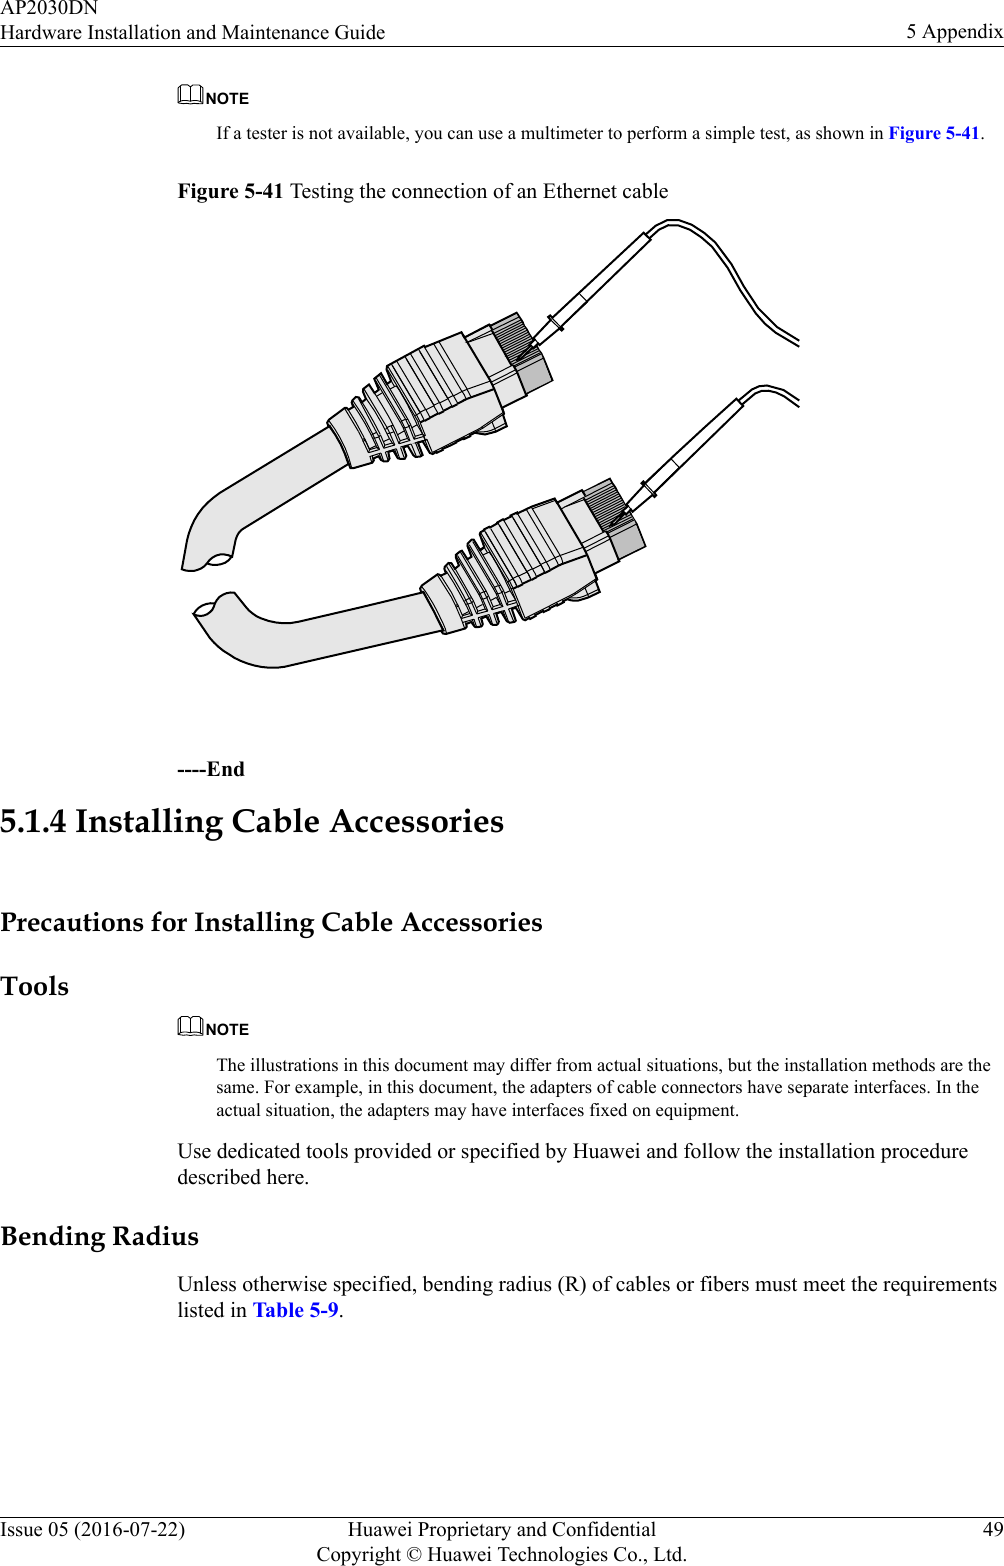 NOTEIf a tester is not available, you can use a multimeter to perform a simple test, as shown in Figure 5-41.Figure 5-41 Testing the connection of an Ethernet cable ----End5.1.4 Installing Cable AccessoriesPrecautions for Installing Cable AccessoriesToolsNOTEThe illustrations in this document may differ from actual situations, but the installation methods are thesame. For example, in this document, the adapters of cable connectors have separate interfaces. In theactual situation, the adapters may have interfaces fixed on equipment.Use dedicated tools provided or specified by Huawei and follow the installation proceduredescribed here.Bending RadiusUnless otherwise specified, bending radius (R) of cables or fibers must meet the requirementslisted in Table 5-9.AP2030DNHardware Installation and Maintenance Guide 5 AppendixIssue 05 (2016-07-22) Huawei Proprietary and ConfidentialCopyright © Huawei Technologies Co., Ltd.49